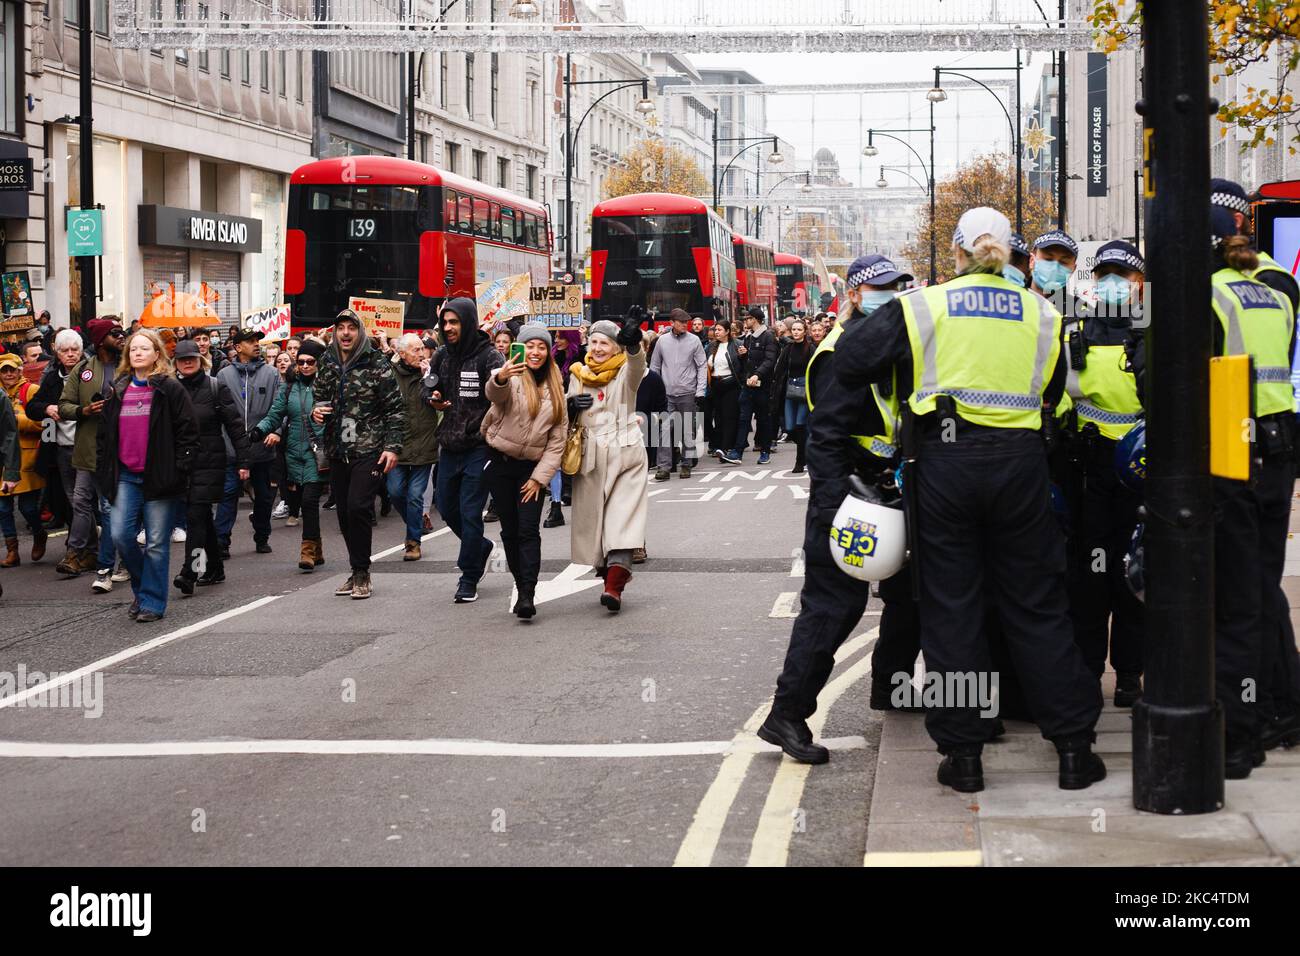 Anti-lockdown activists march along Oxford Street in London, England, on November 28, 2020. In an evening update the Metropolitan Police announced it had made 155 arrests over the course of the day's demonstrations, for offences including breaches of coronavirus regulations, assault on police and possession of drugs. London is to return to 'Tier 2' or 'high alert' covid-19 restrictions once the current England-wide coronavirus lockdown ends next Wednesday. All three of the tiers, assigned to local authorities across England, have been strengthened since the lockdown began on November 5, howeve Stock Photo